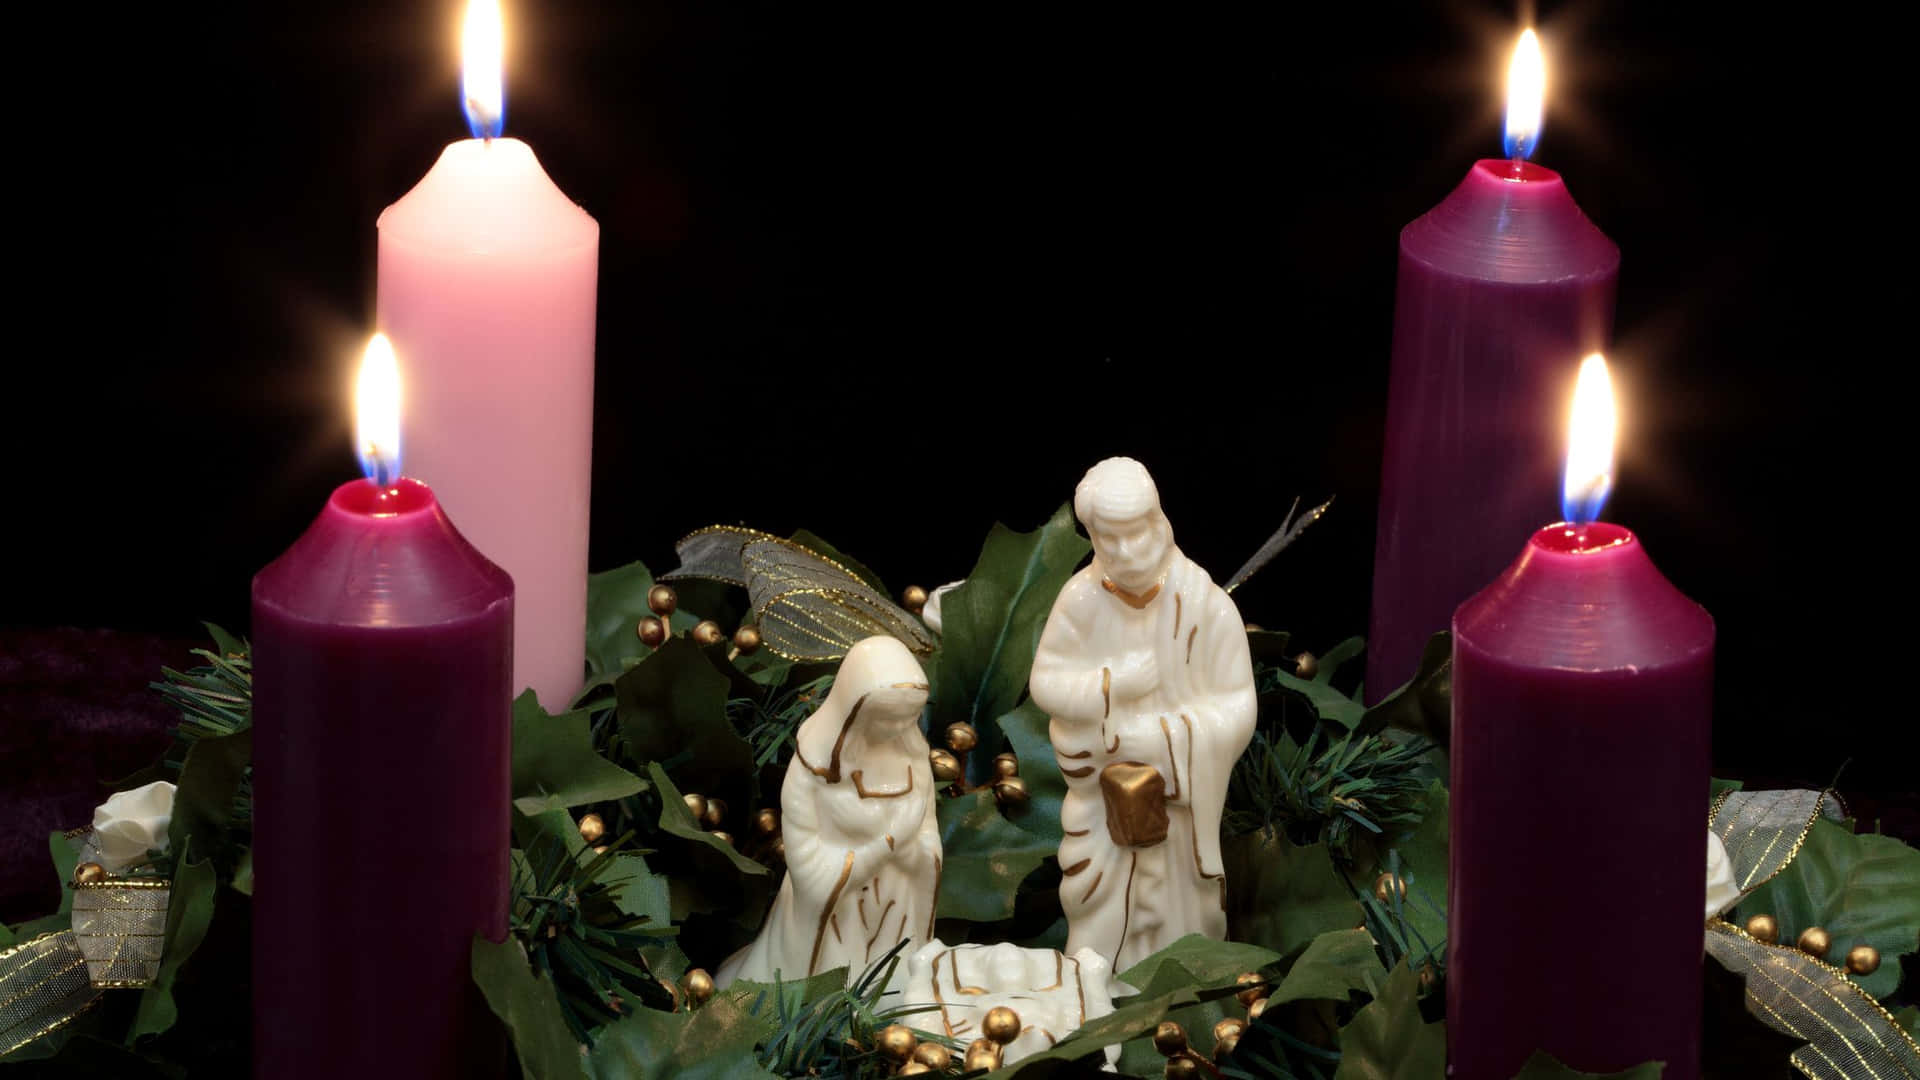 Celebrate advent with peace and joy!